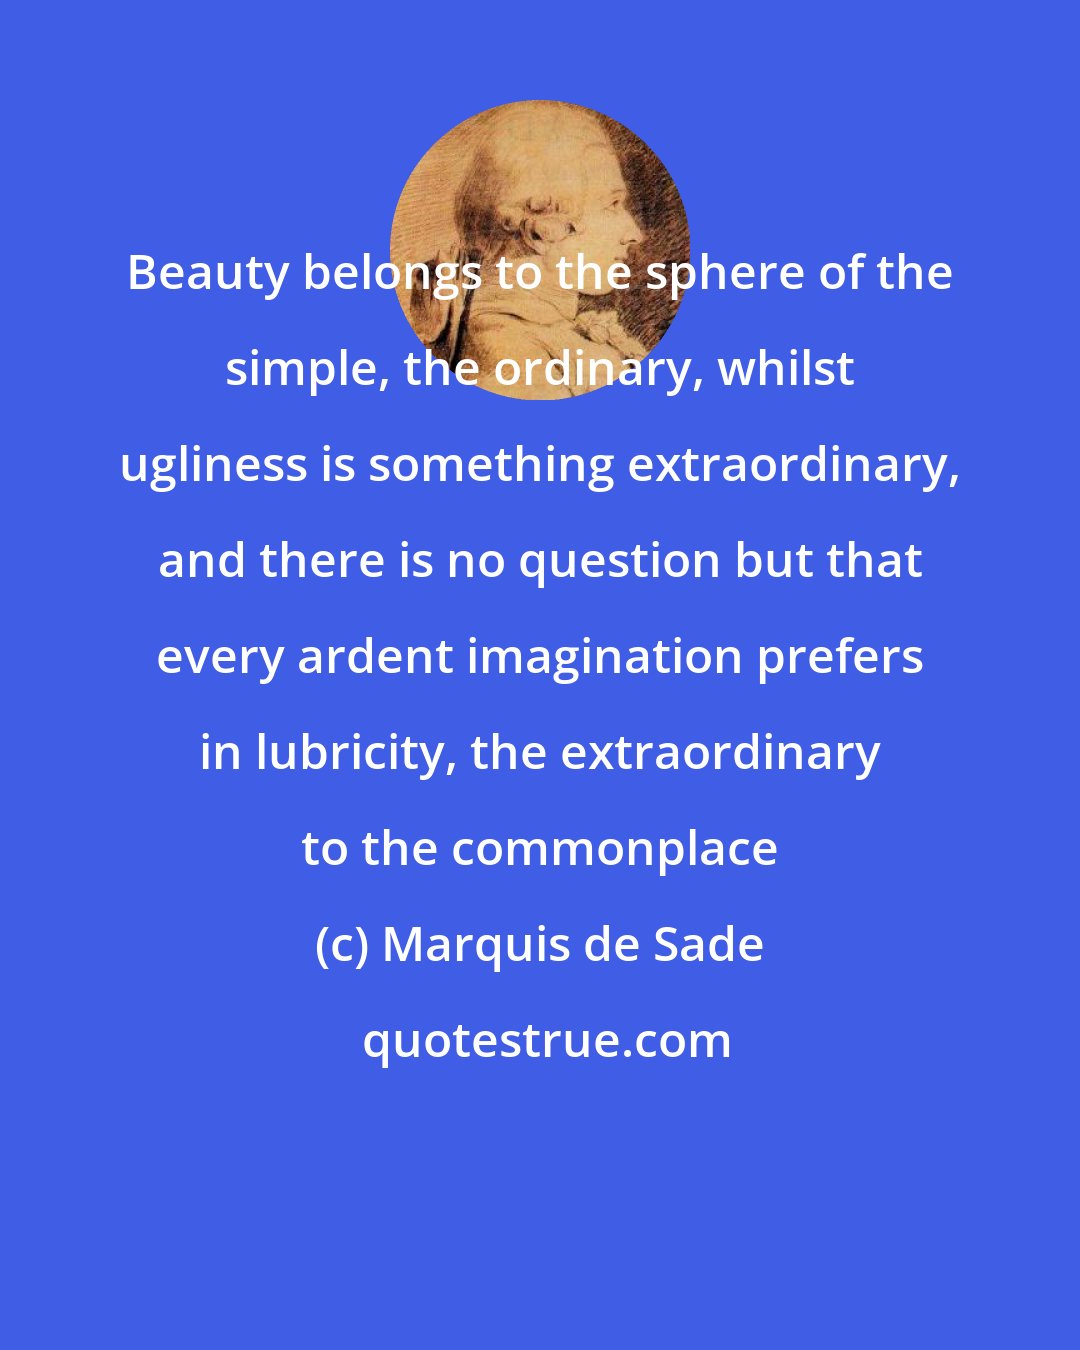 Marquis de Sade: Beauty belongs to the sphere of the simple, the ordinary, whilst ugliness is something extraordinary, and there is no question but that every ardent imagination prefers in lubricity, the extraordinary to the commonplace